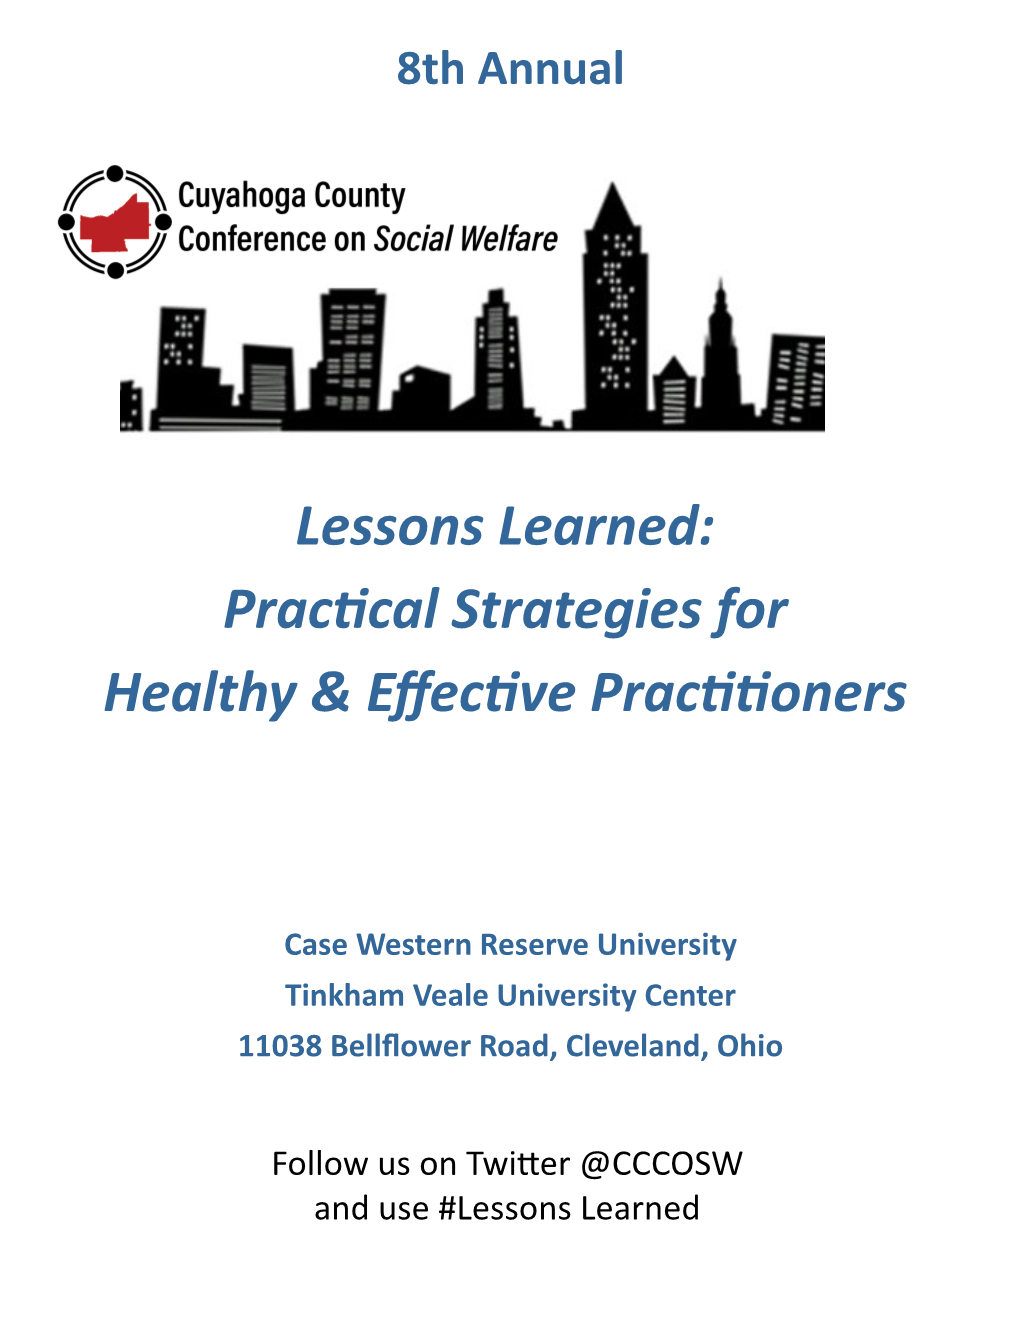 Lessons Learned: Practical Strategies for Healthy & Effective Practitioners